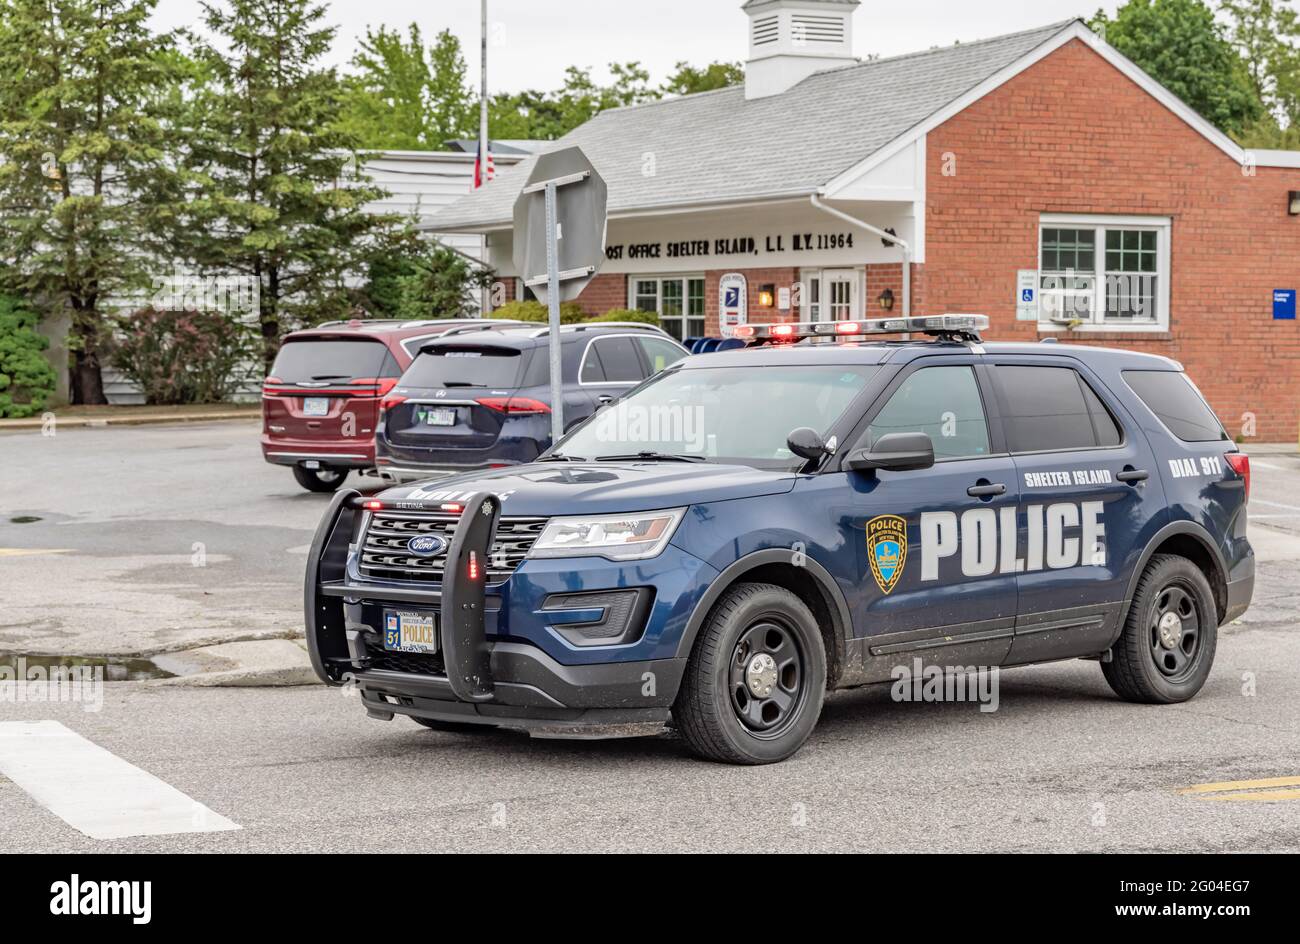 A Ford Shelter island police car Stock Photo